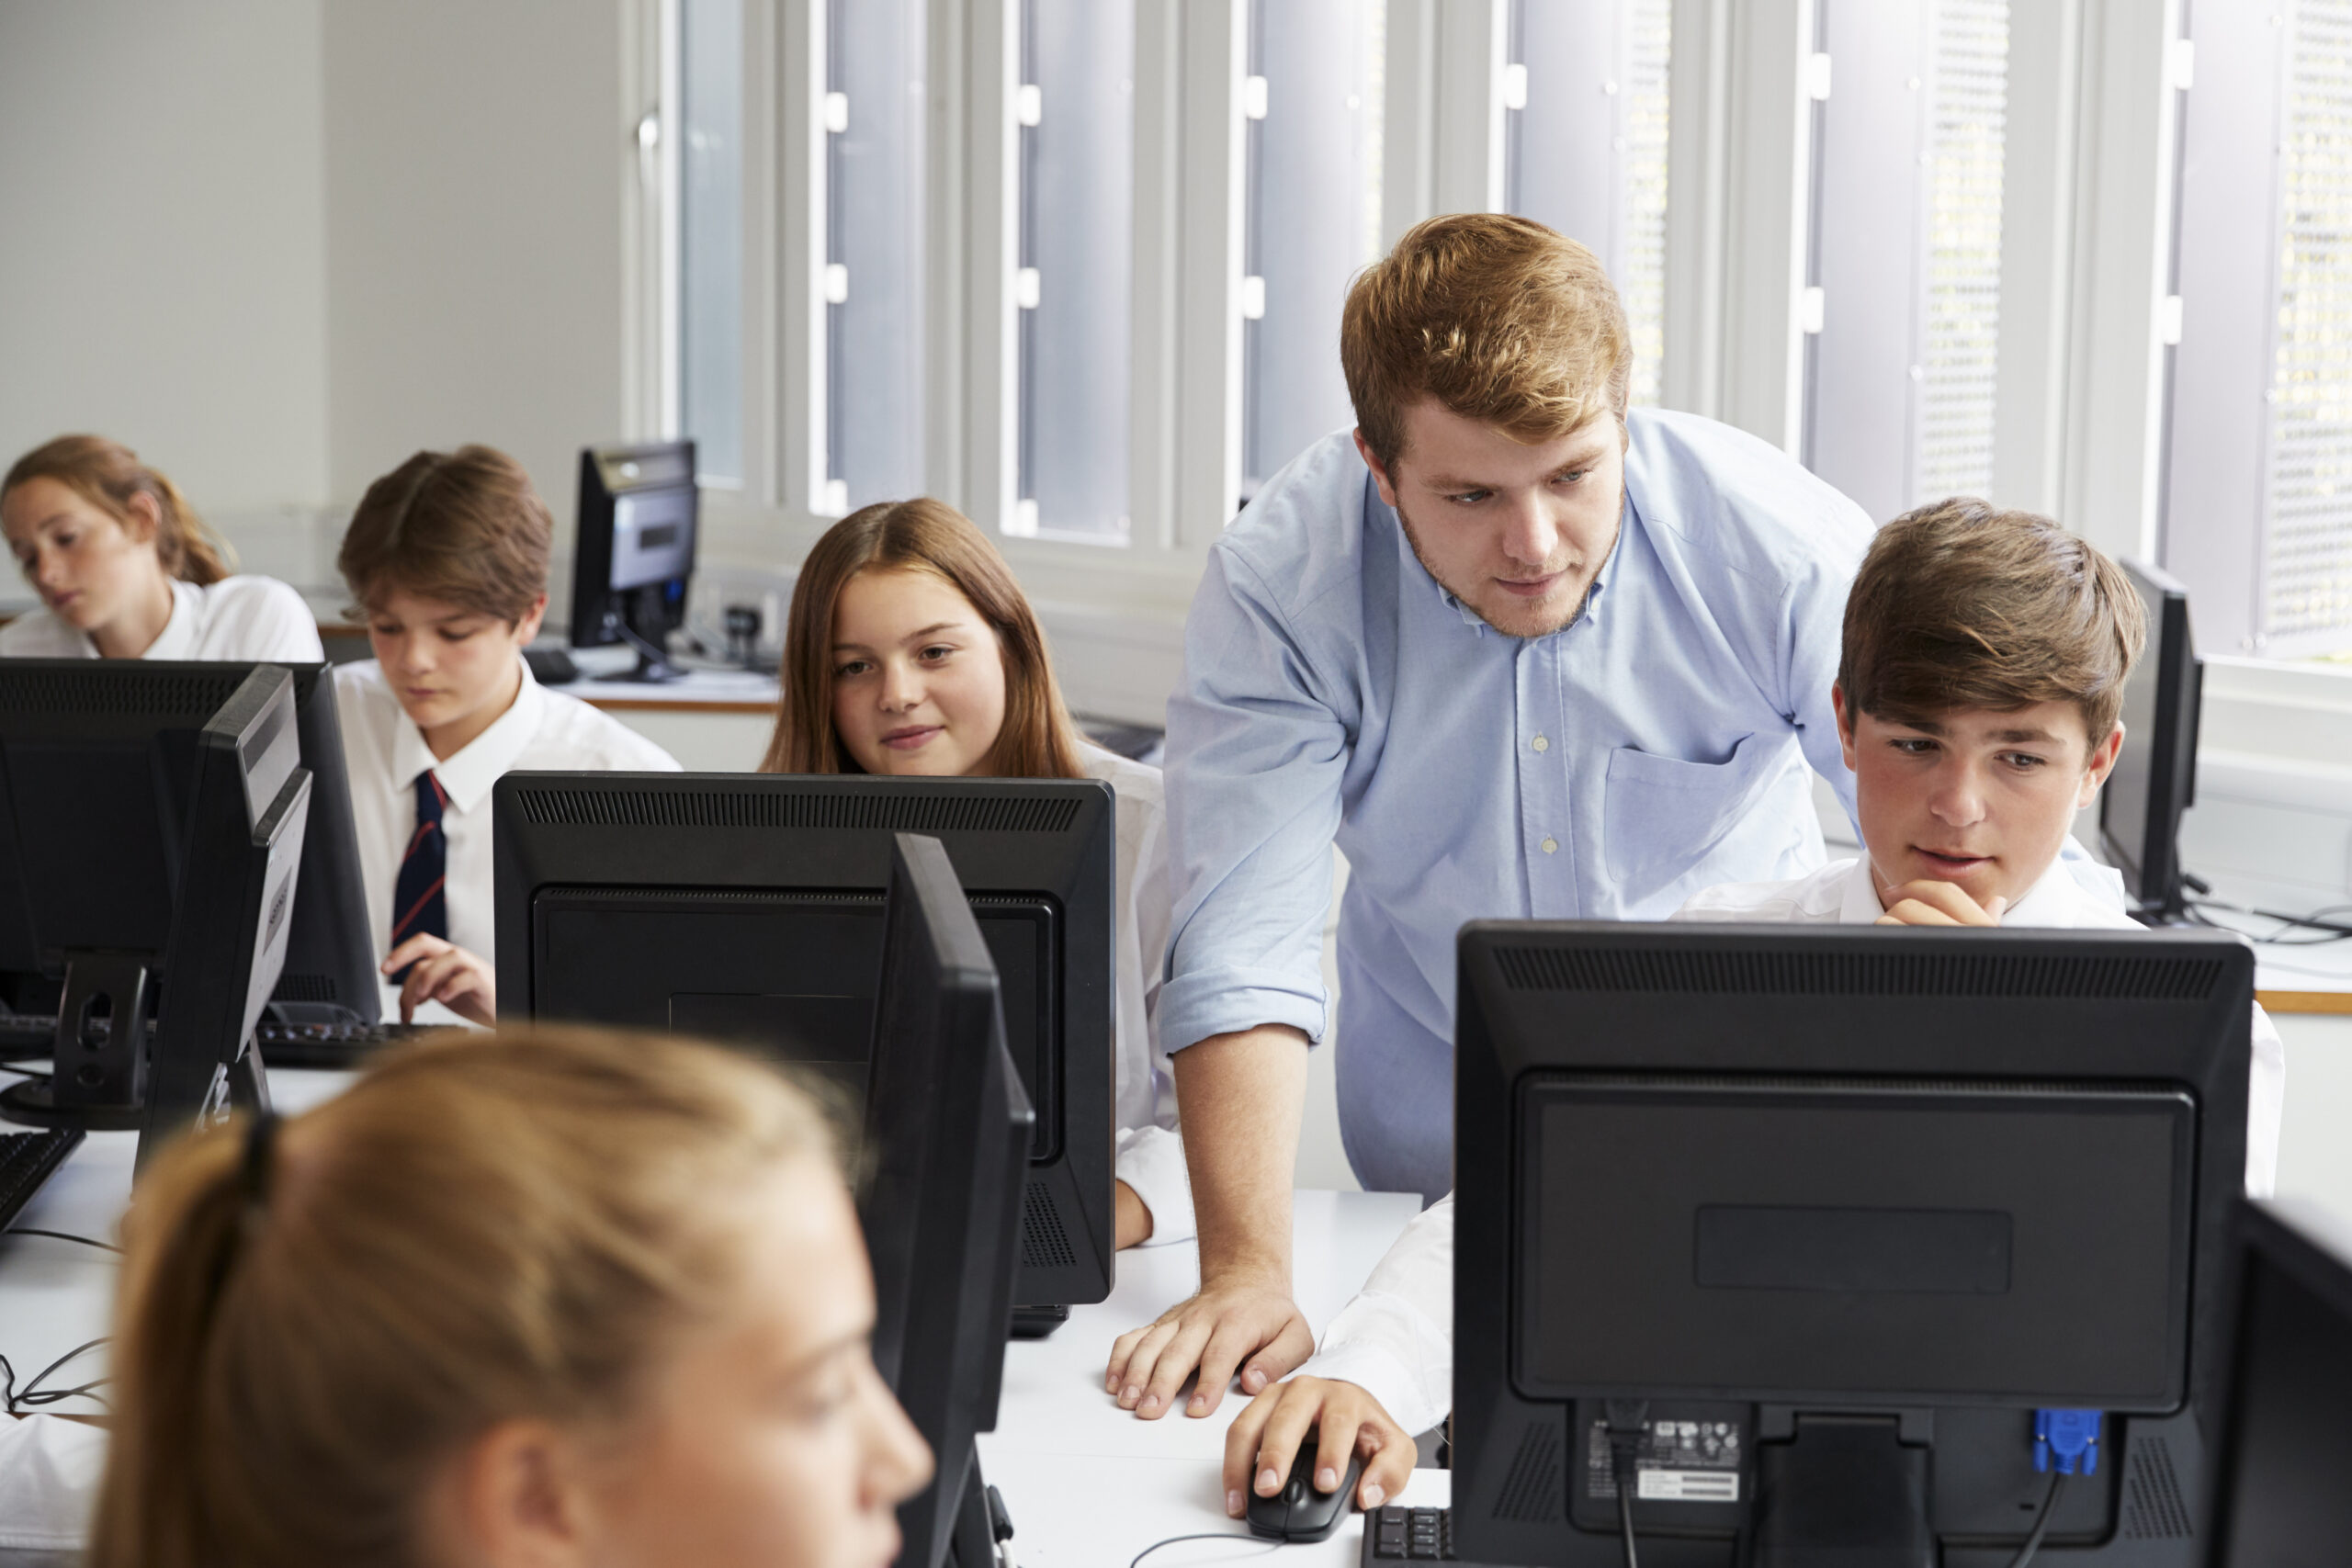 Students in uniform on computers while teacher observes